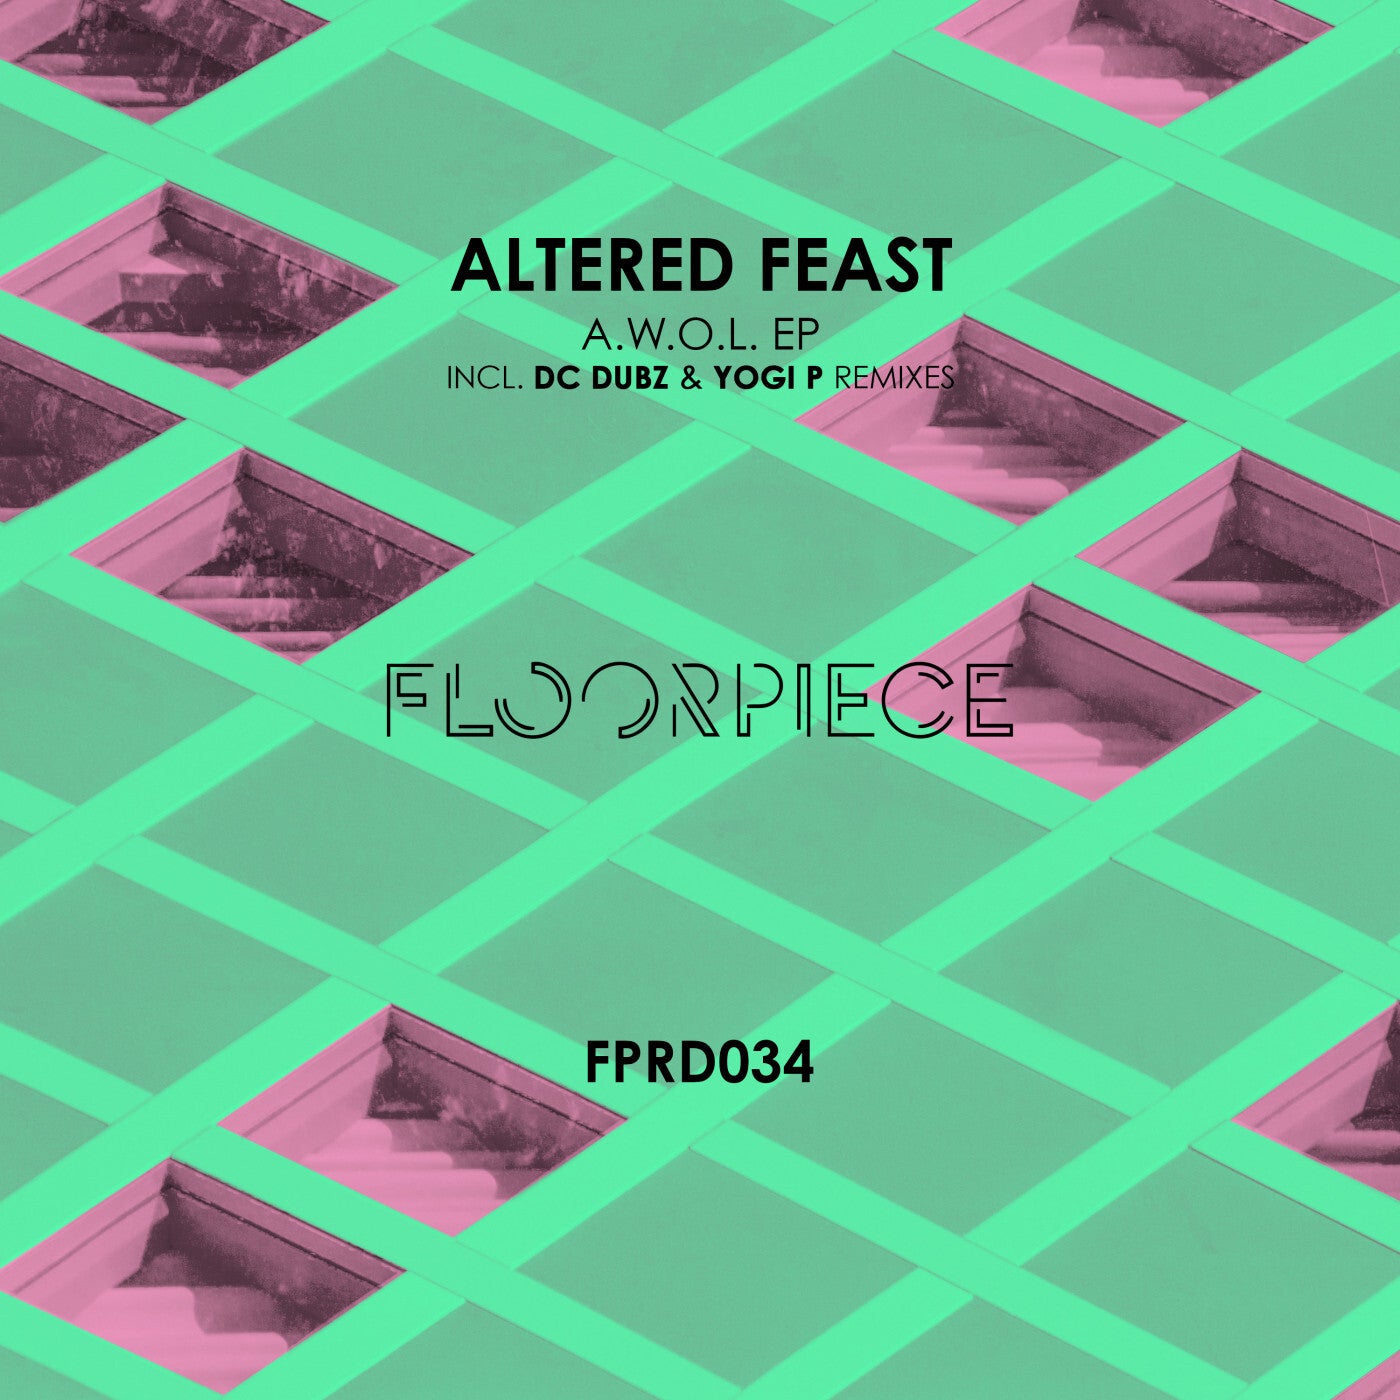 Altered Feast – A.W.O.L. EP [FPRD034]